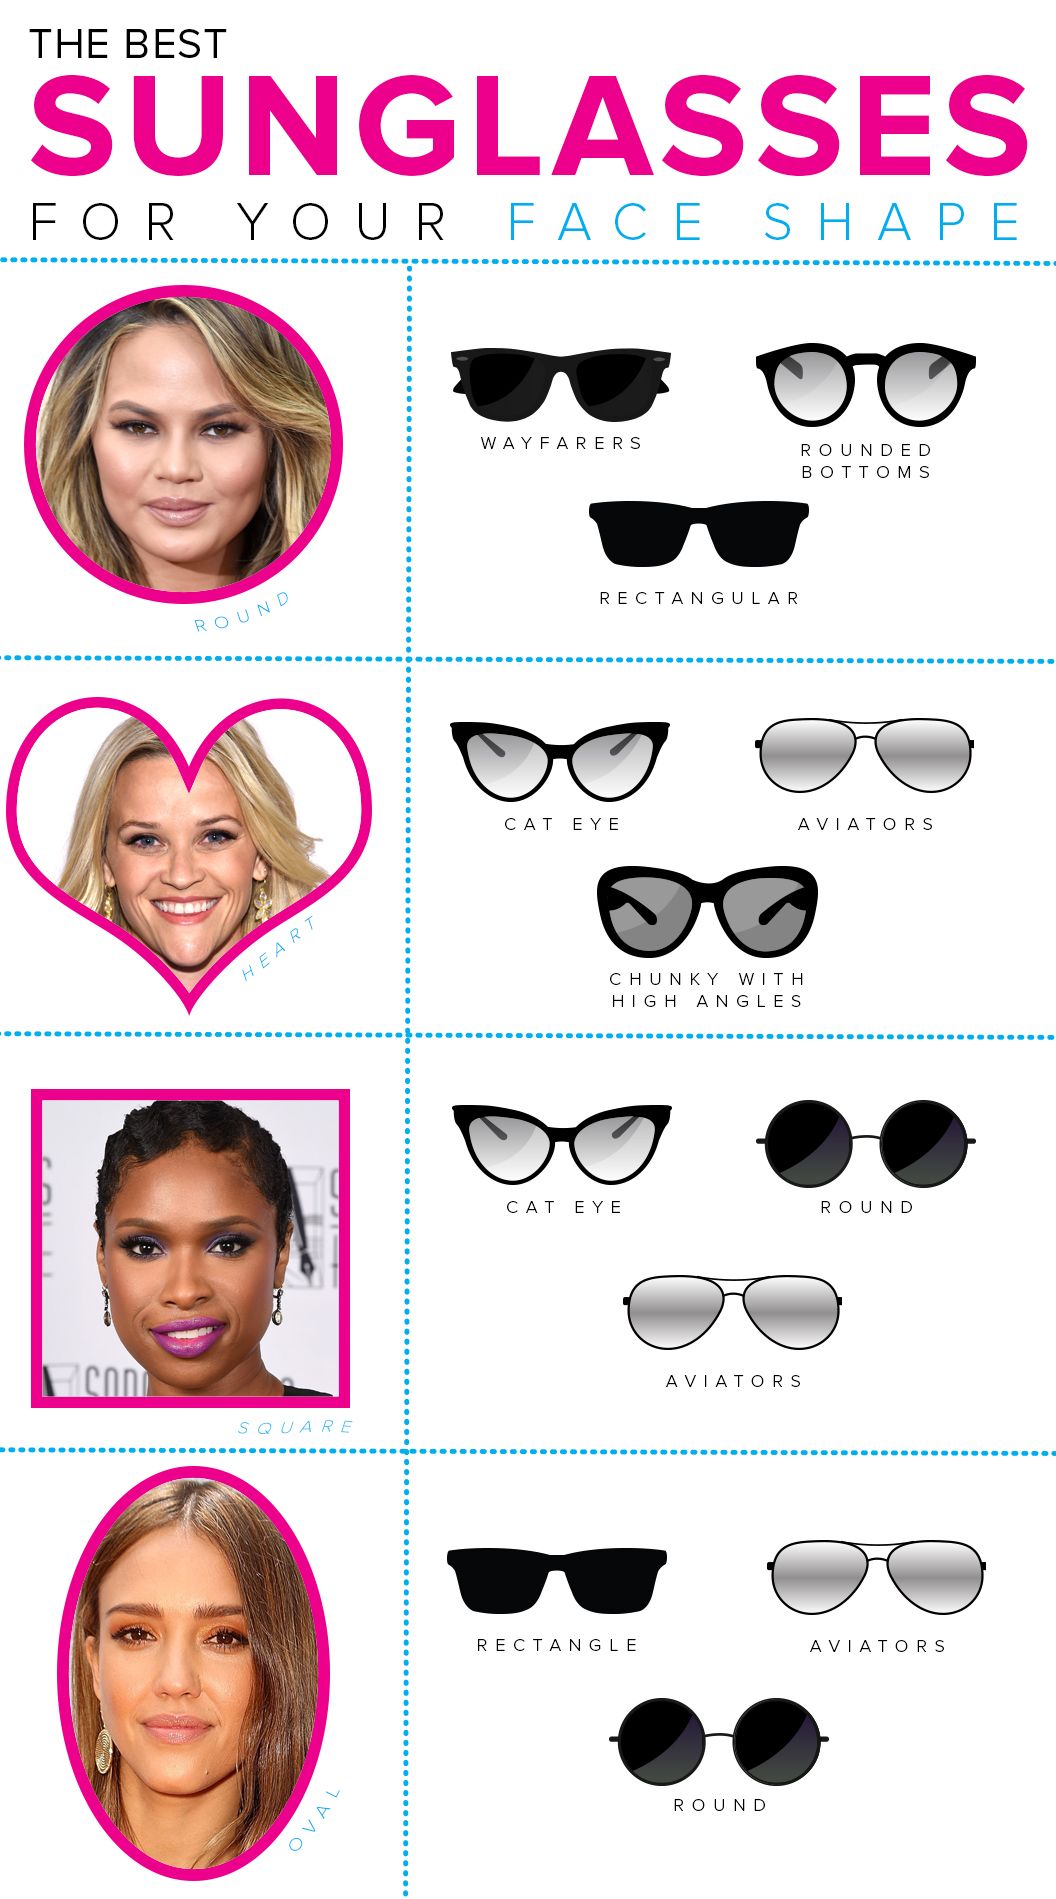 This guide will help you find the best sunglasses for your face shape.  These sunglass styles will fit your face shape. There are tips to help make  the